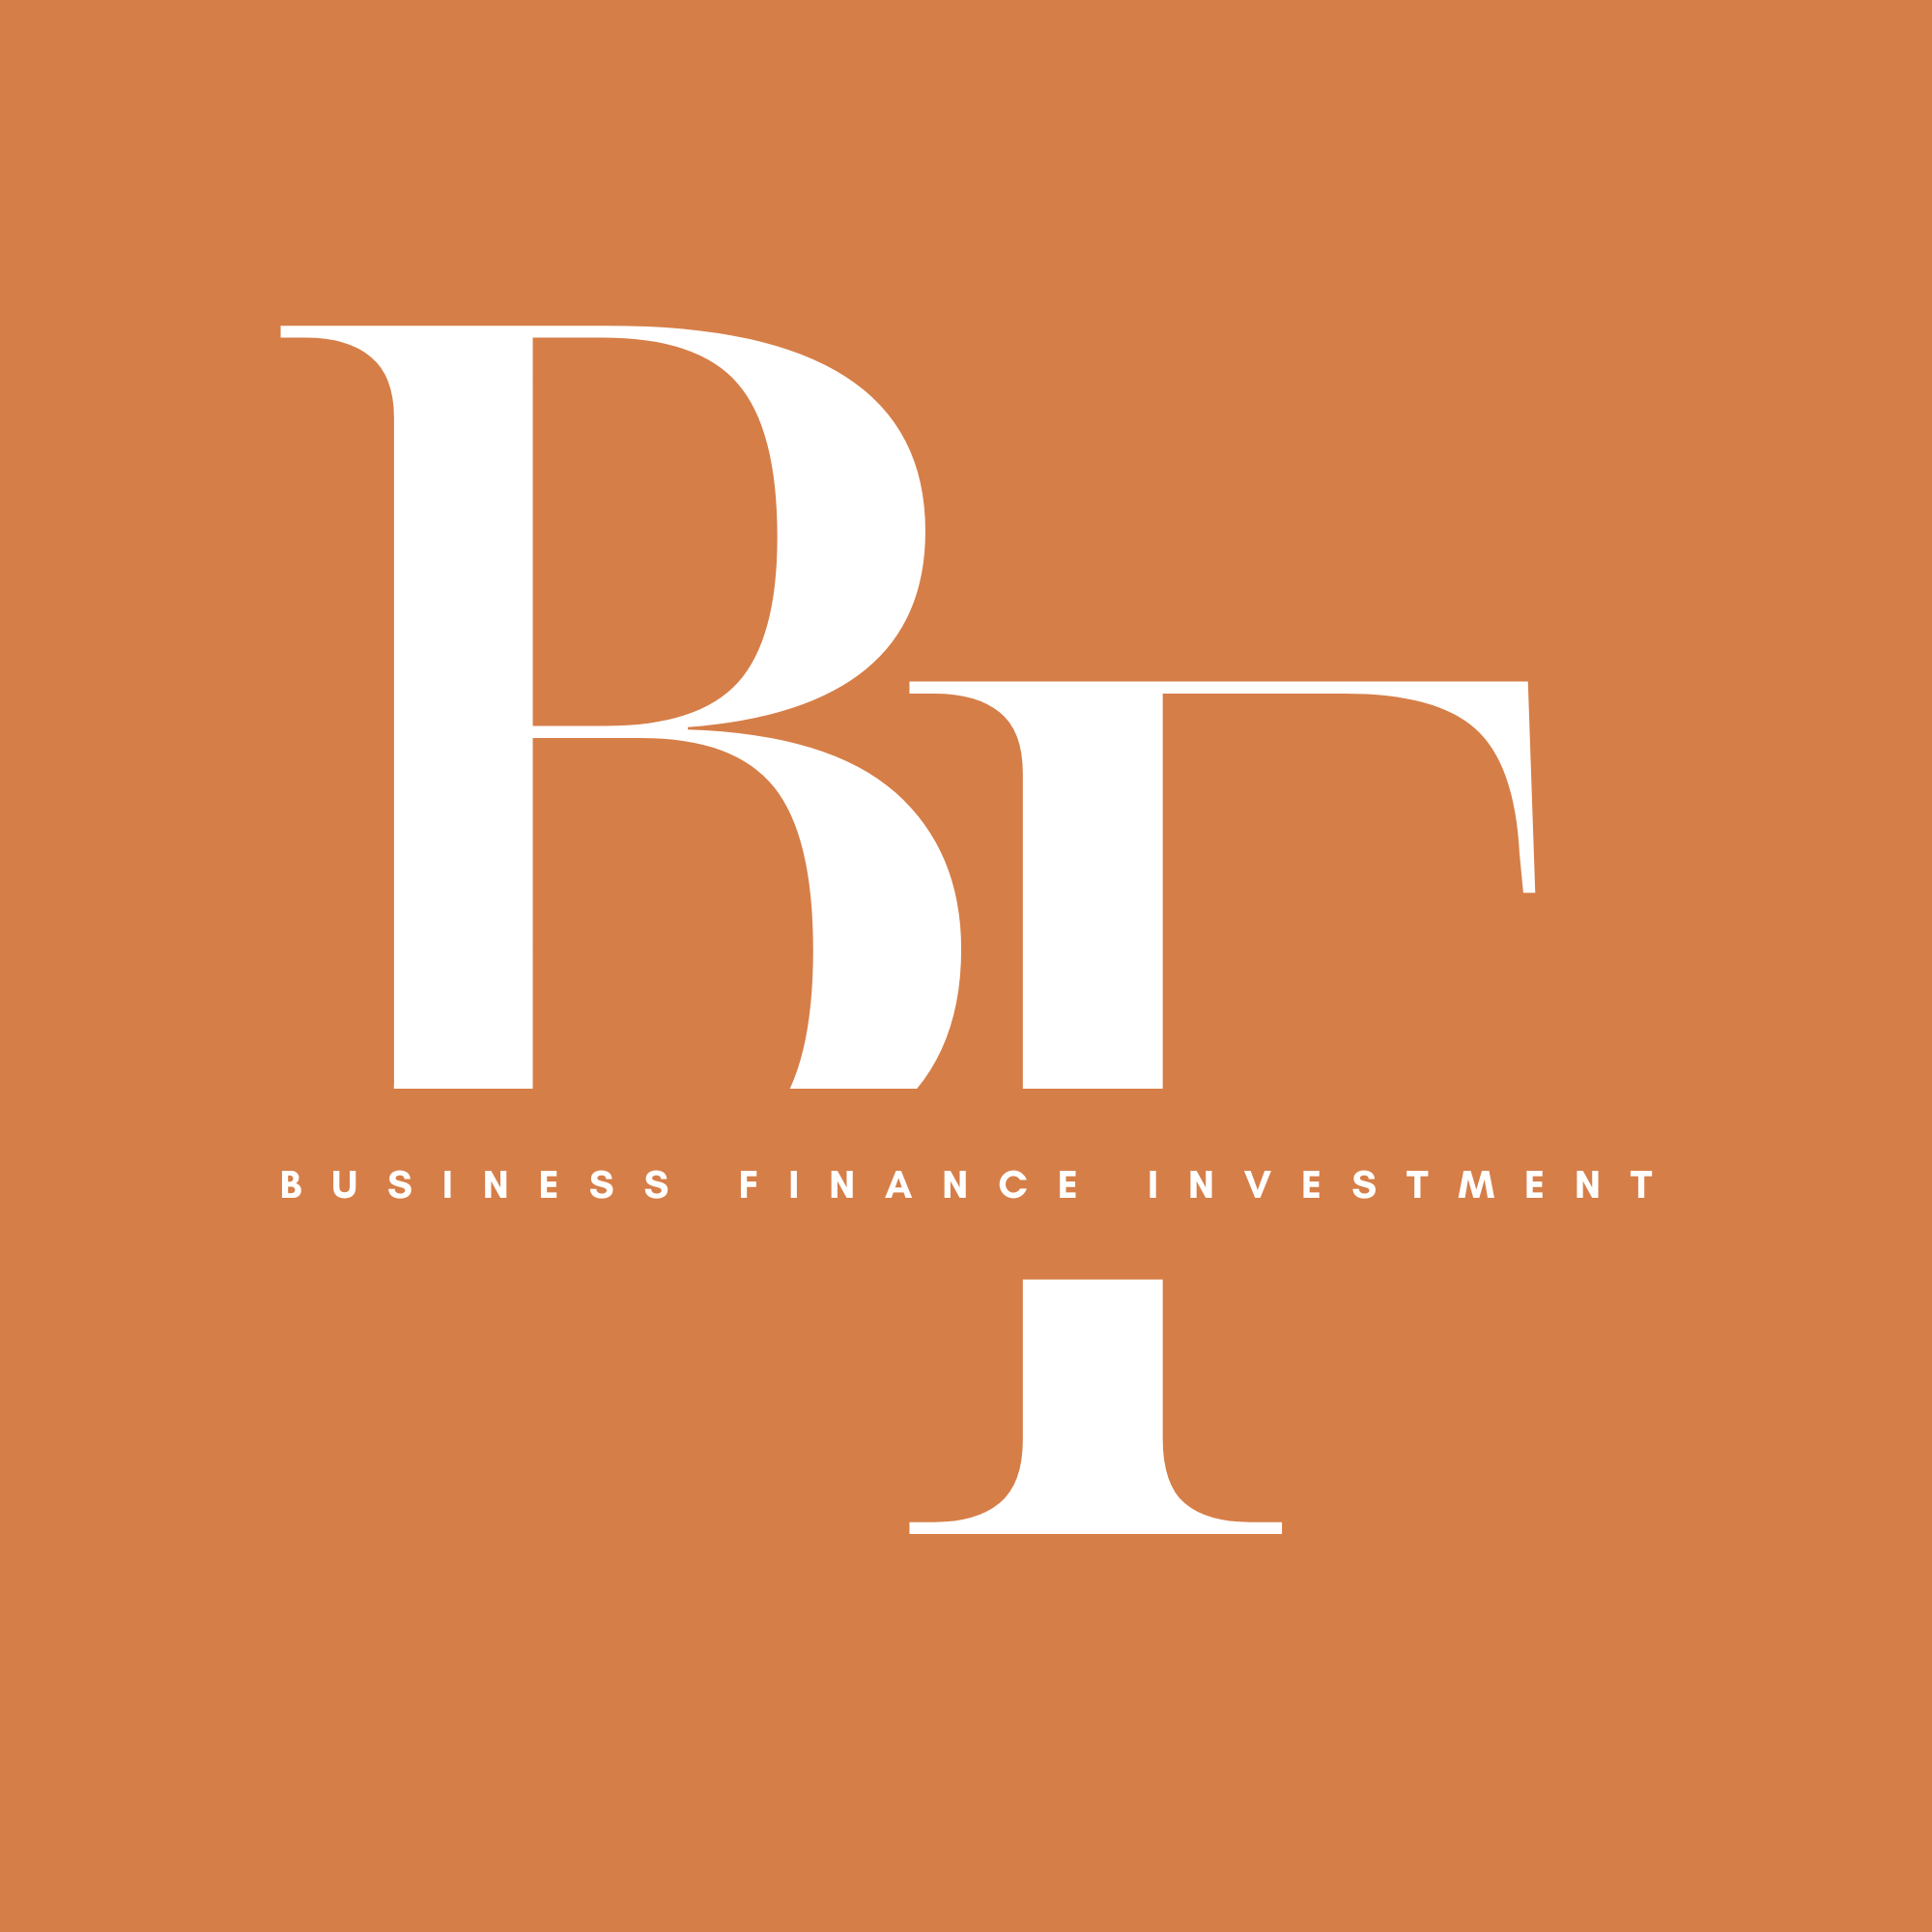 BUSINESS FINANCE INVESTMENT